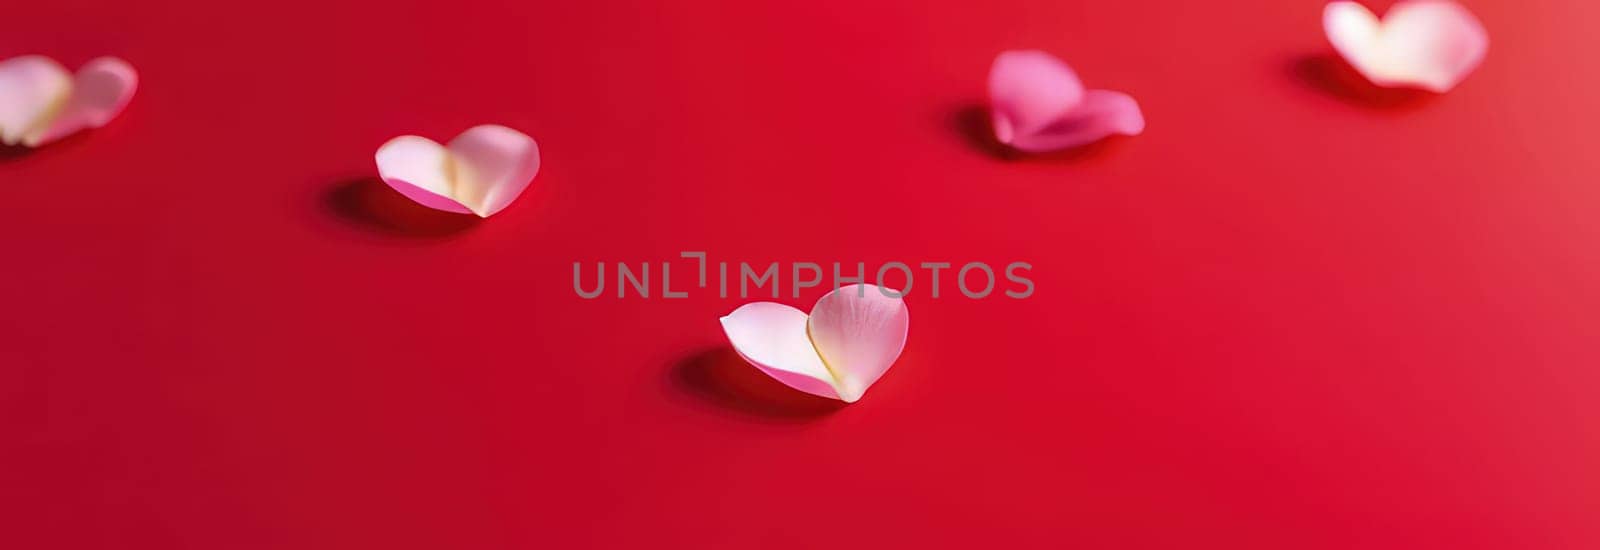 St Valentines day, wedding banner with rose petals on red background, wedding love and romance card template texture. Copy space. Use for cute love sale banner, voucher, greeting card, wrapping paper by Angelsmoon